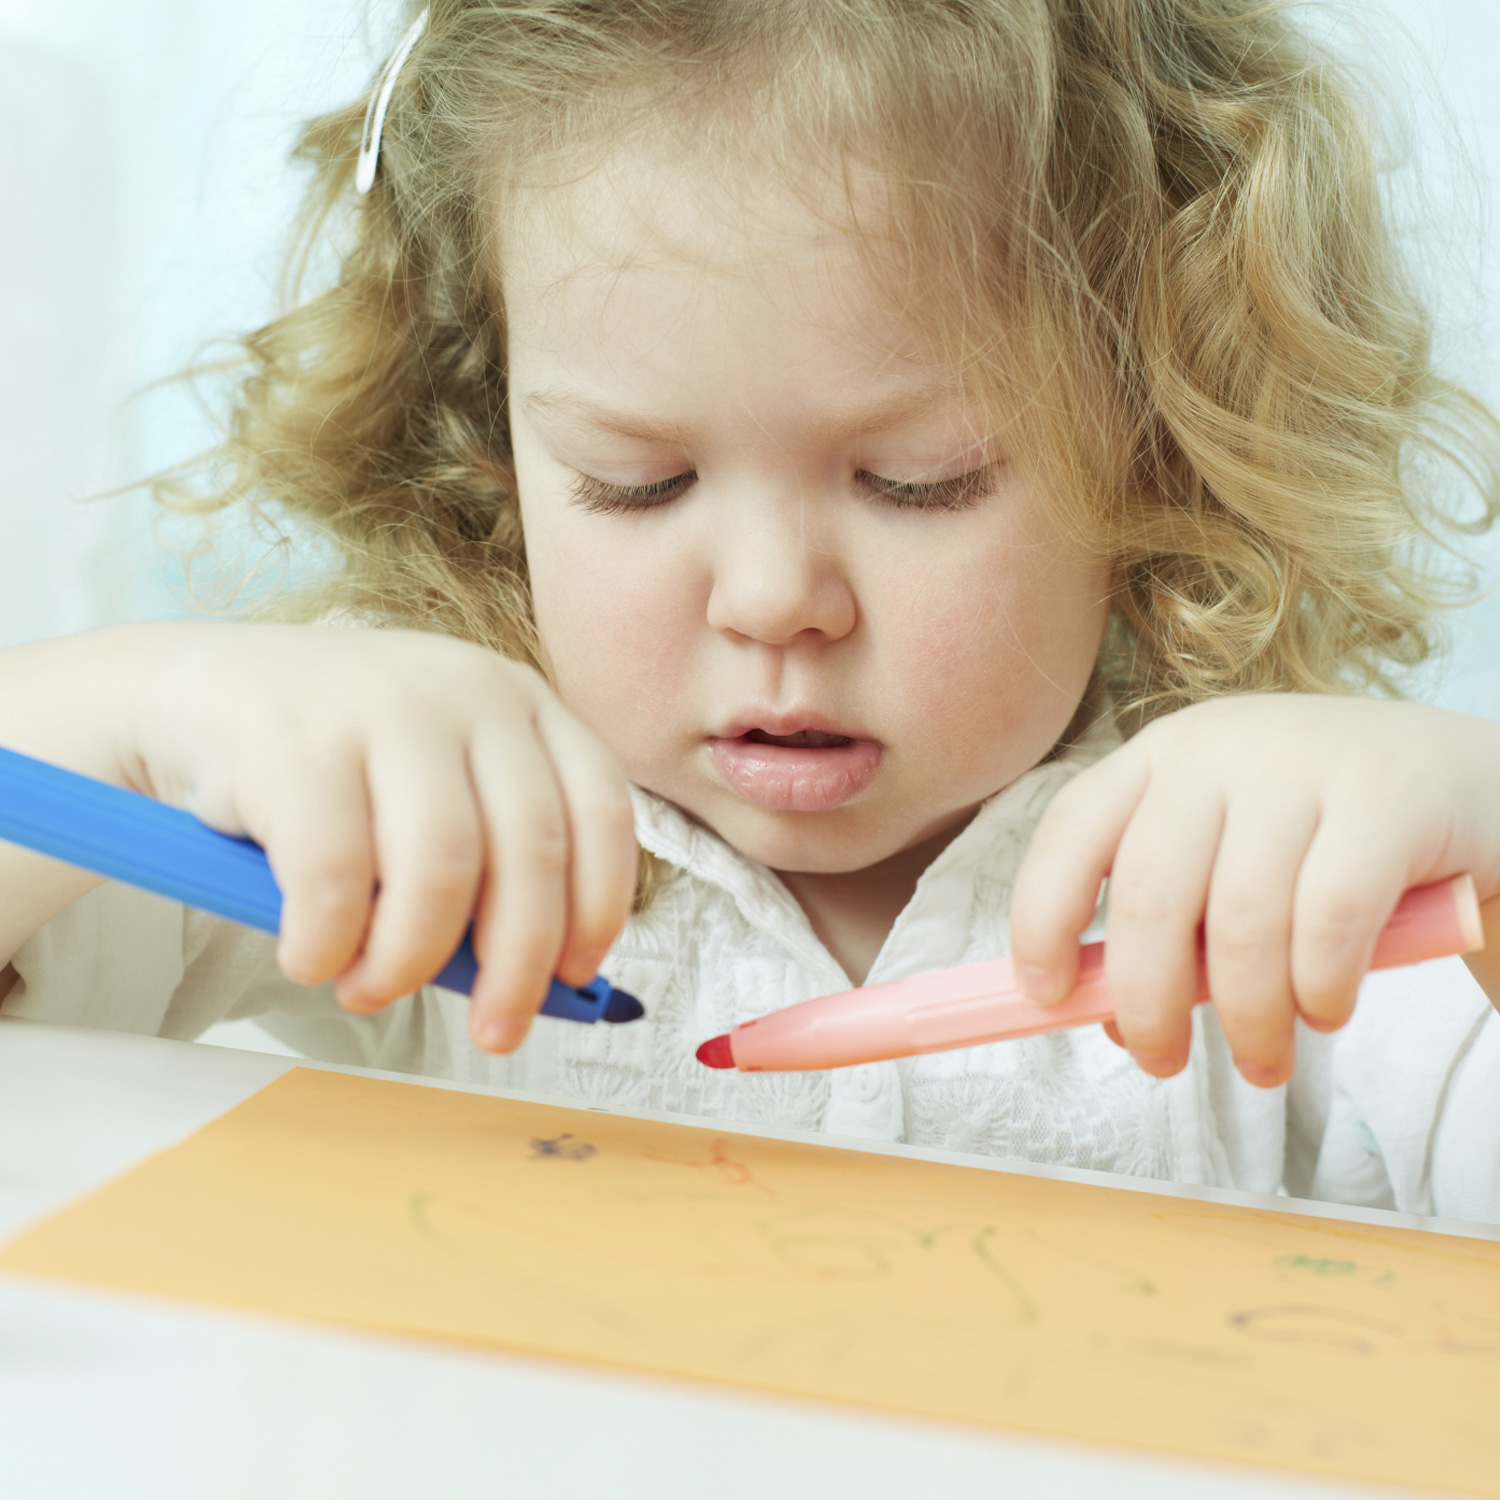 Games and activities to teach beginning writing skills to two-year-olds.